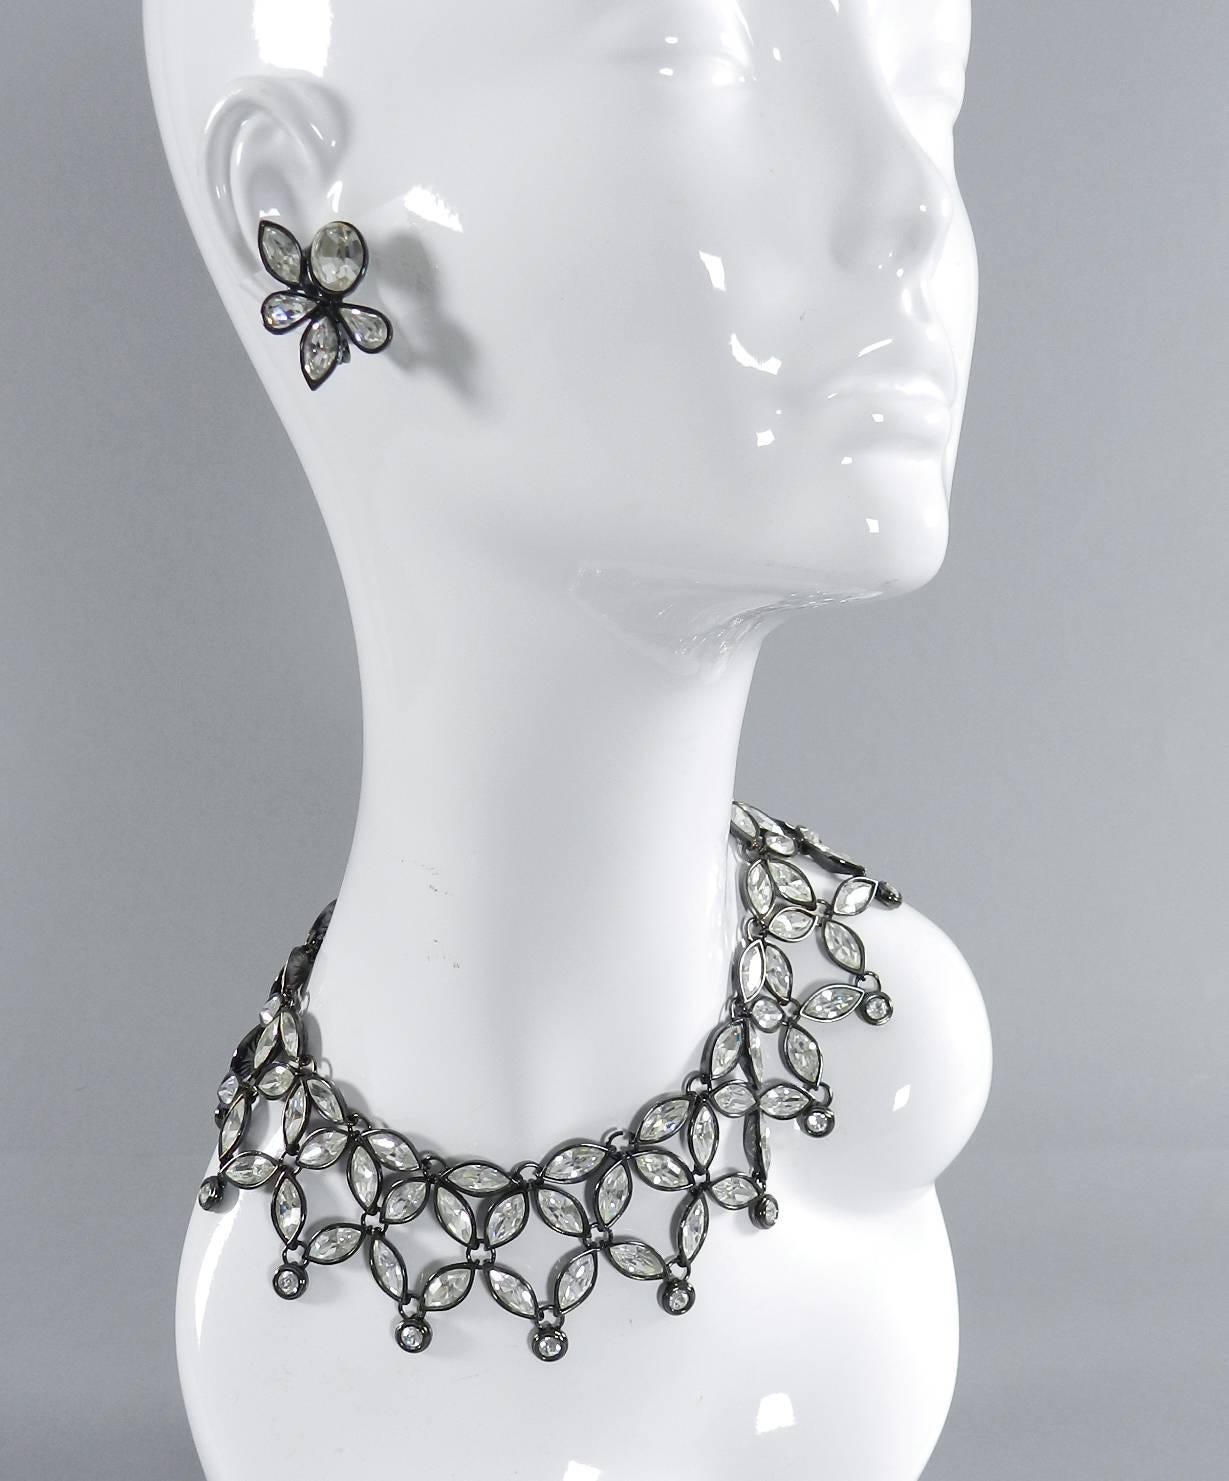 YSL Yves Saint Laurent Vintage Limited Edition Numbered Rhinestone Bib Necklace with matching earrings. Excellent vintage condition. Clear rhinestones set in dark gunmetal grey setting. Clip earrings. Collar necklace has an etched signed plaque wth